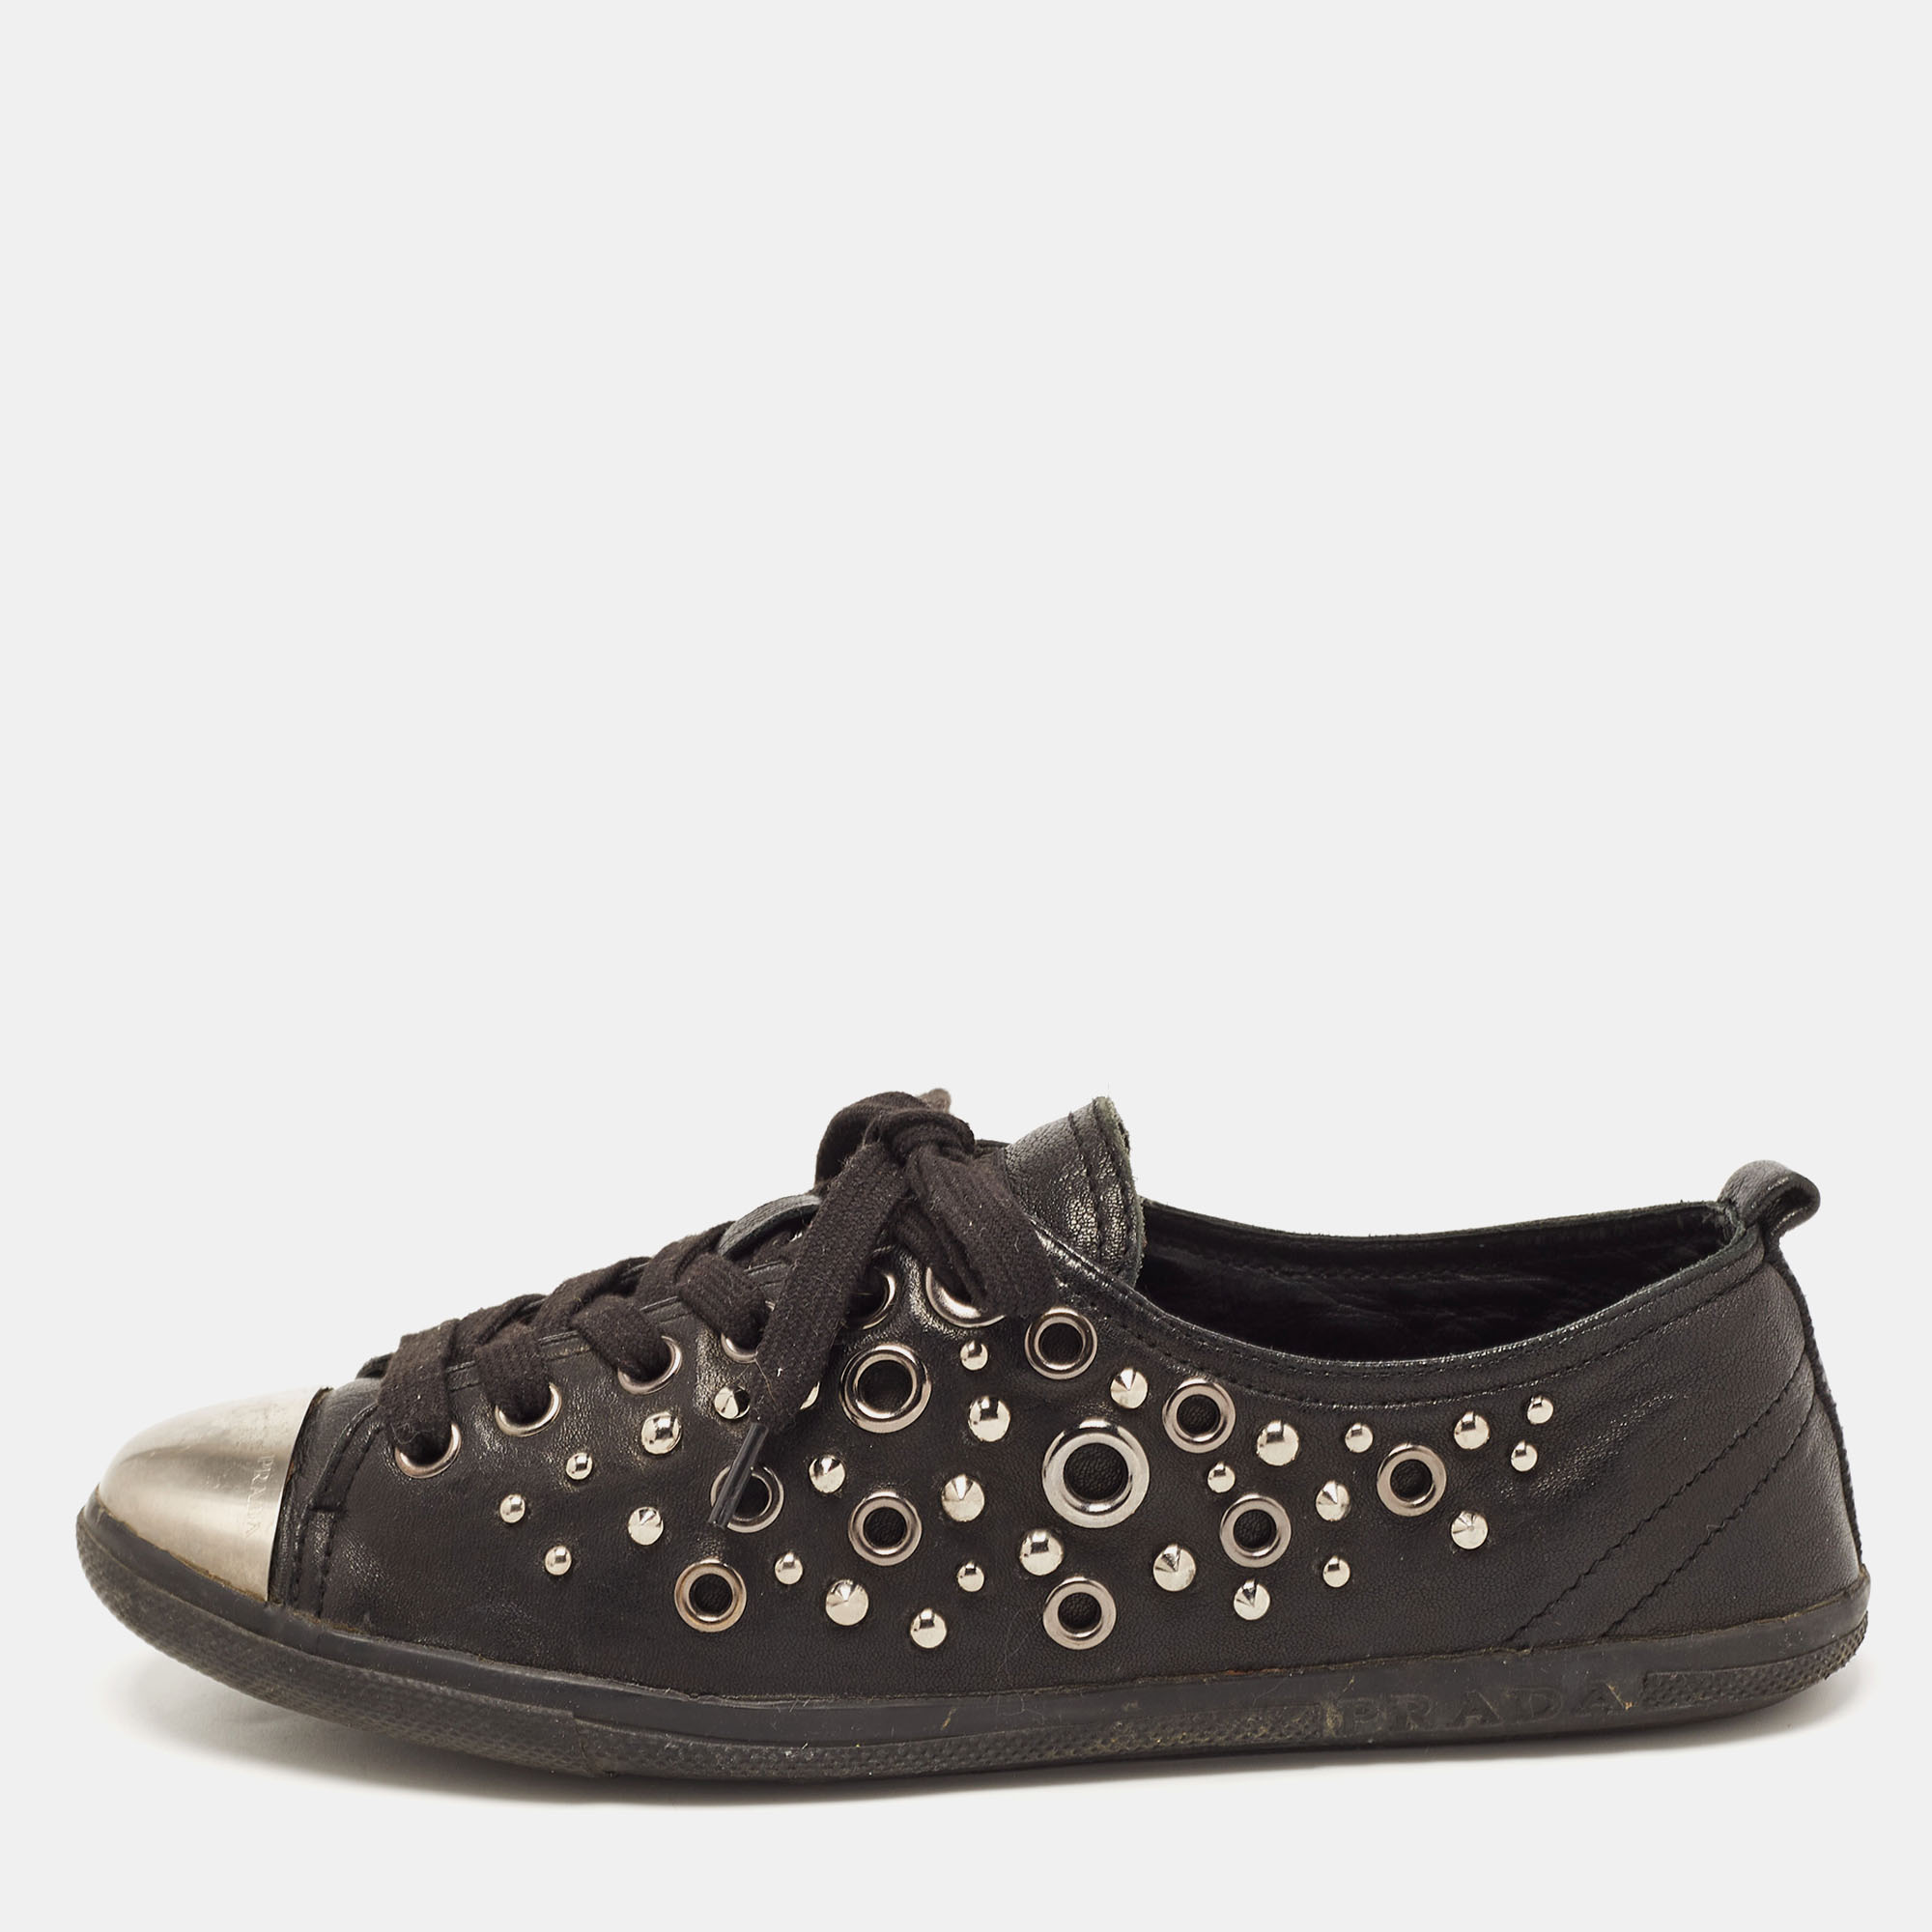 

Prada Sport Black Leather Studded Low Top Sneakers Size